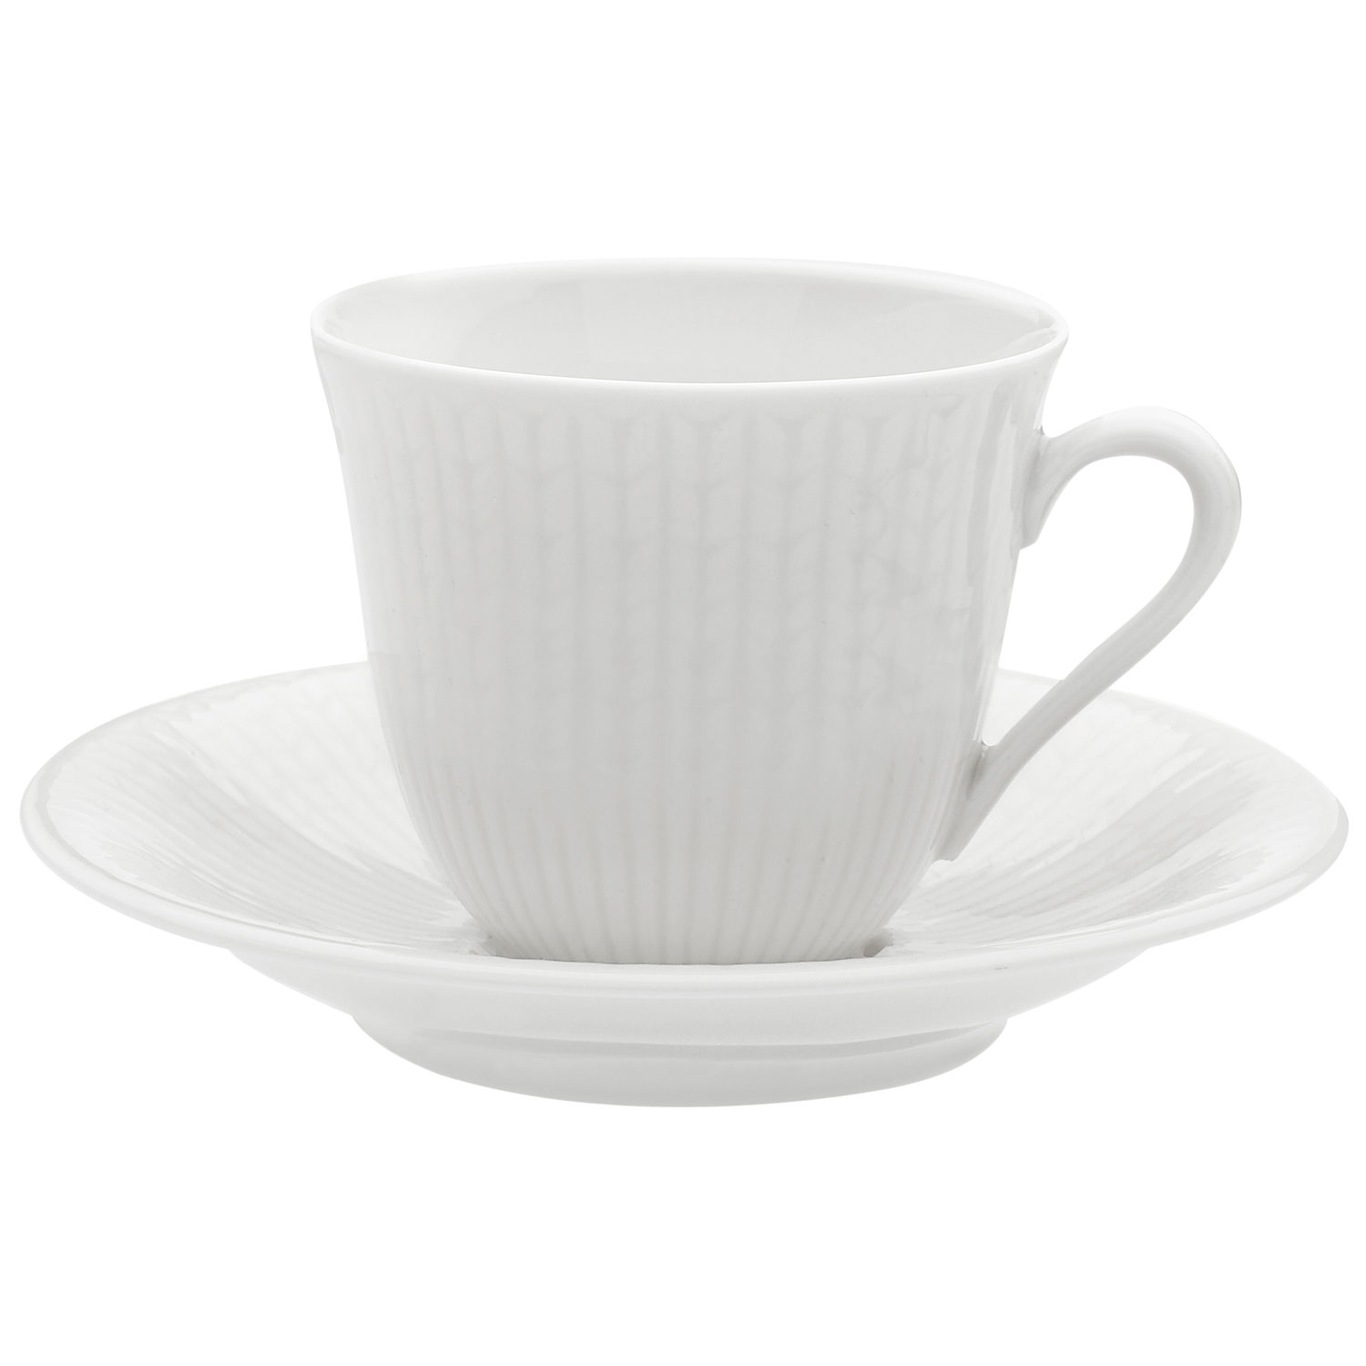 Swedish Grace Coffee Cup With Saucer 16 cl, Snow (White)